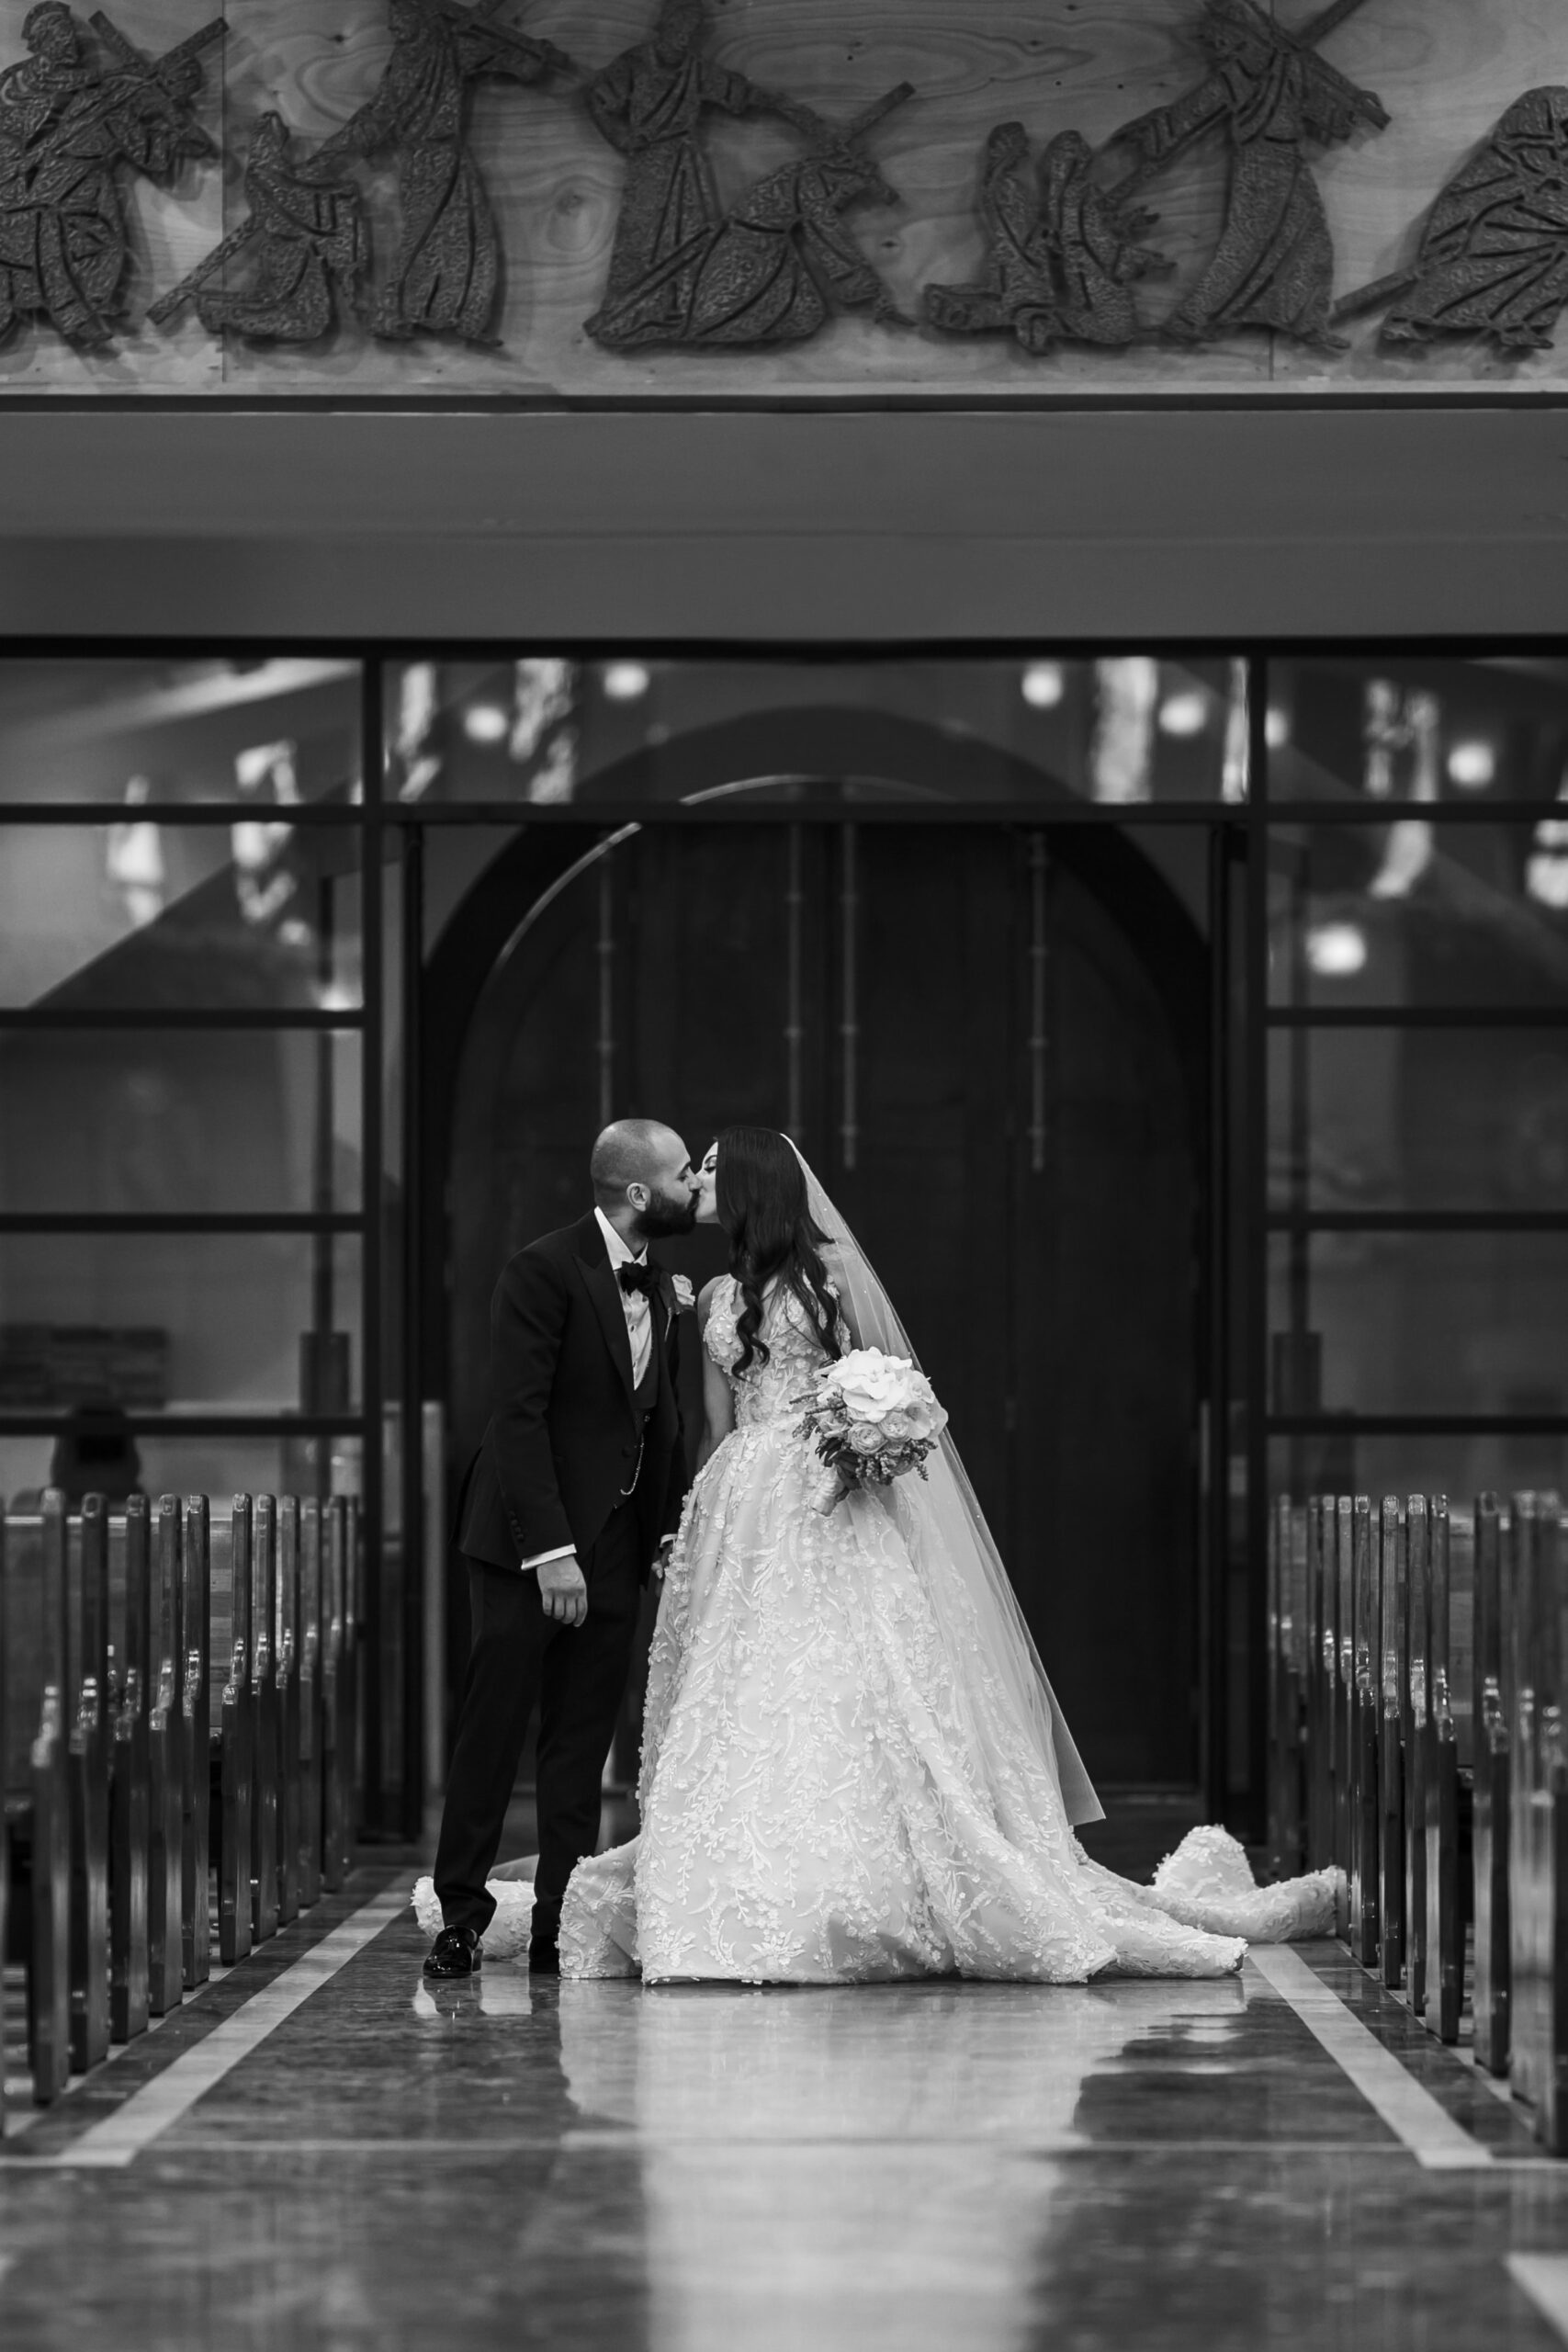 Luxury wedding at Clarence House Sydney, photo by Inlighten Photography - Taylor+Jack